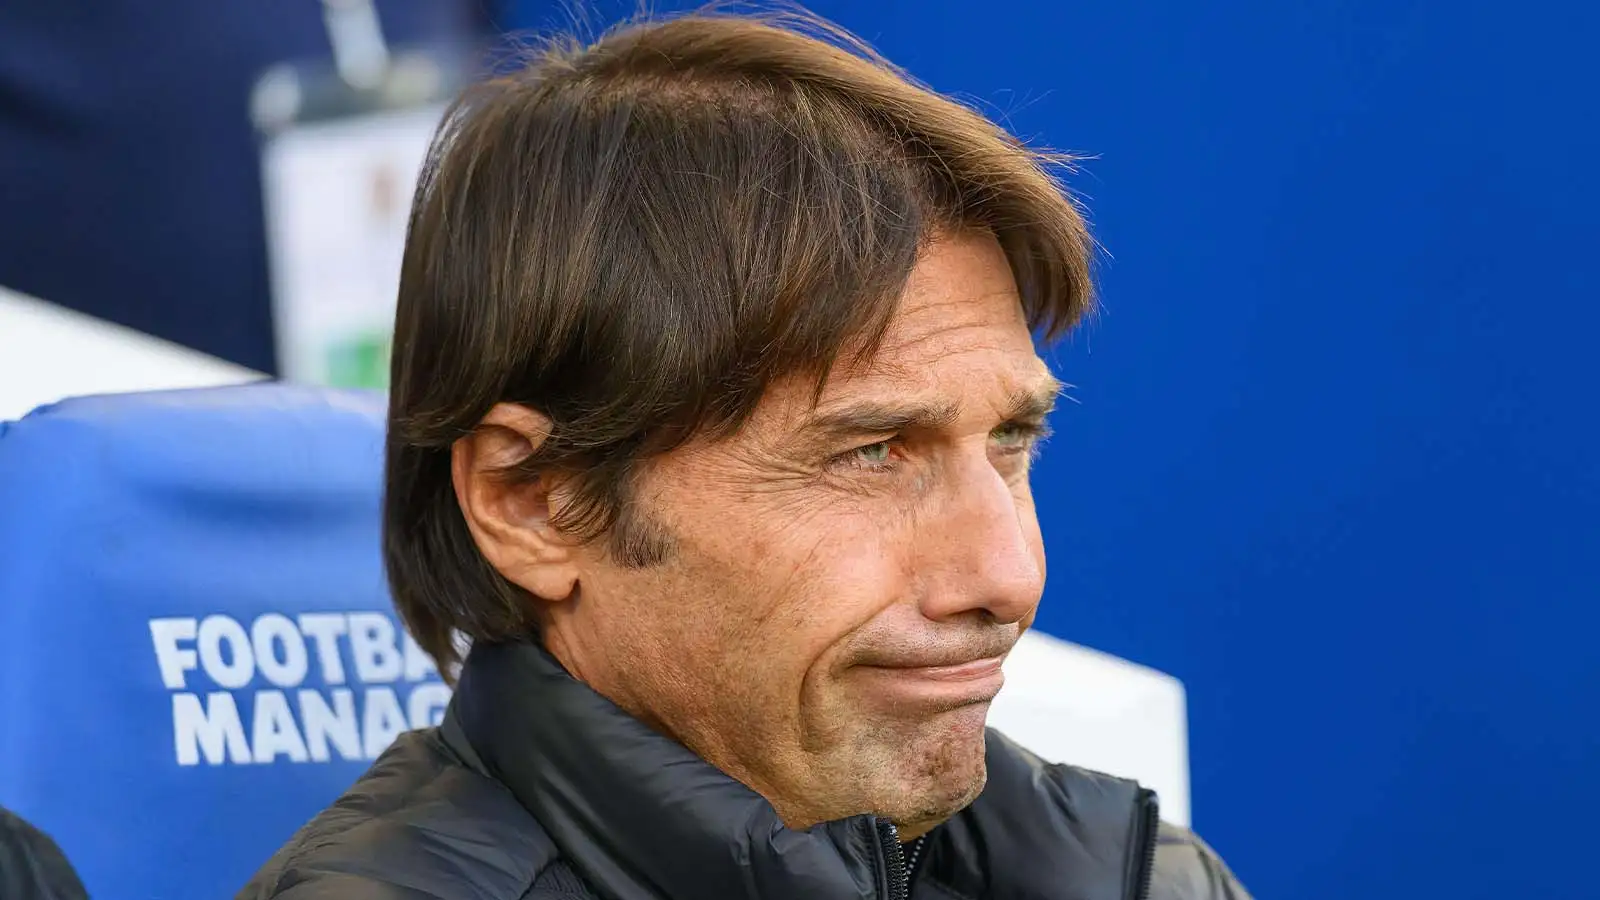 Antonio Conte has unveiled the two finalizings Chelsea missed out on in 2017